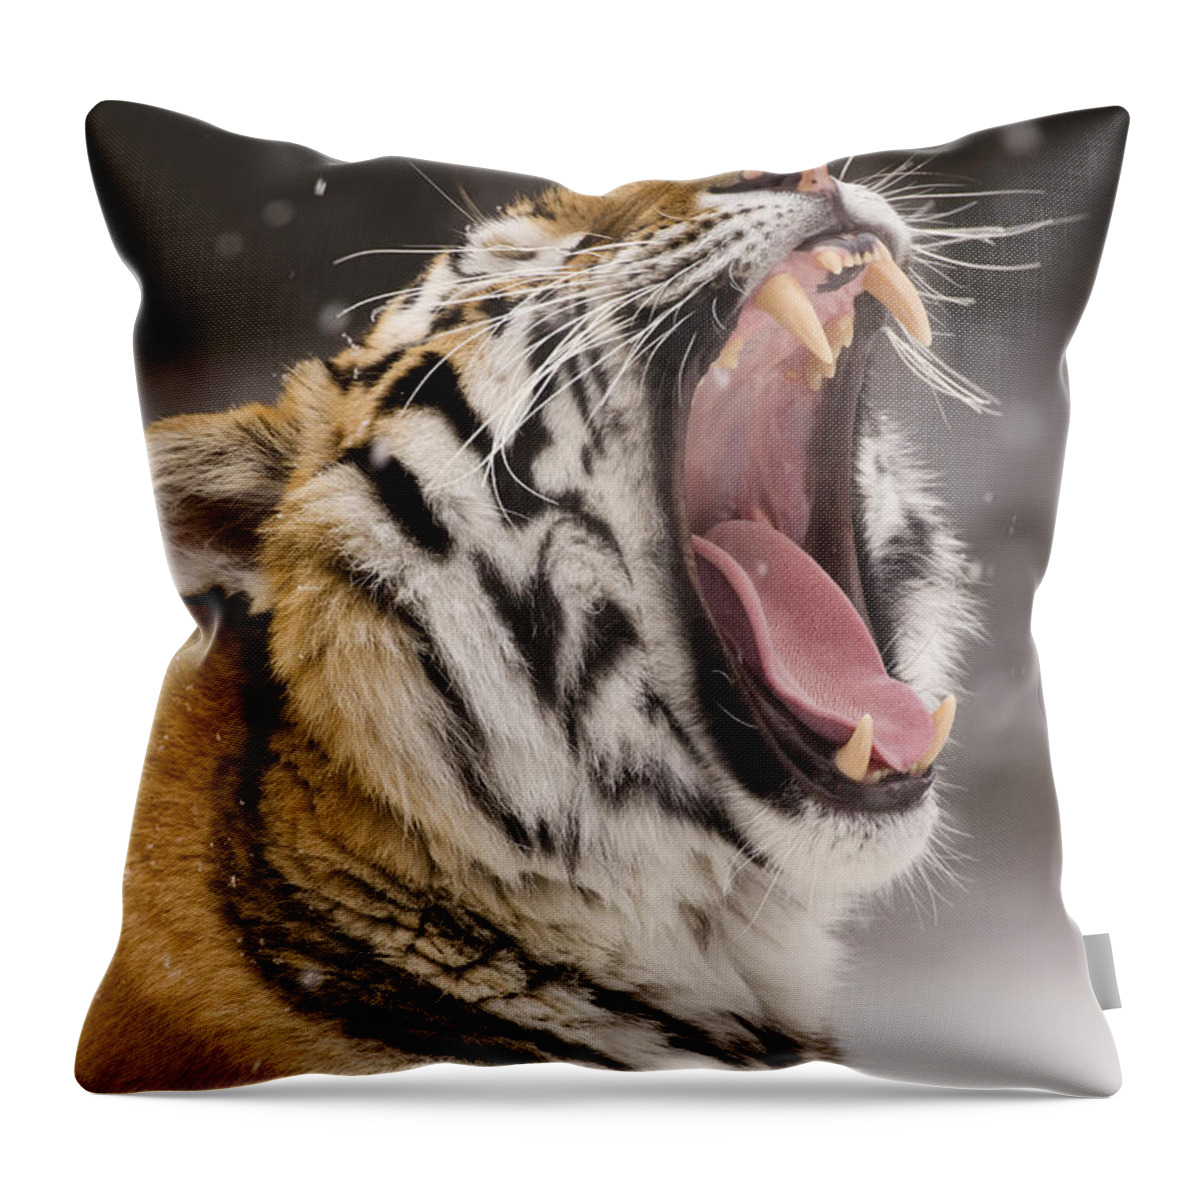 535776 Throw Pillow featuring the photograph Tiger Yawning In Snowfall by Steve Gettle